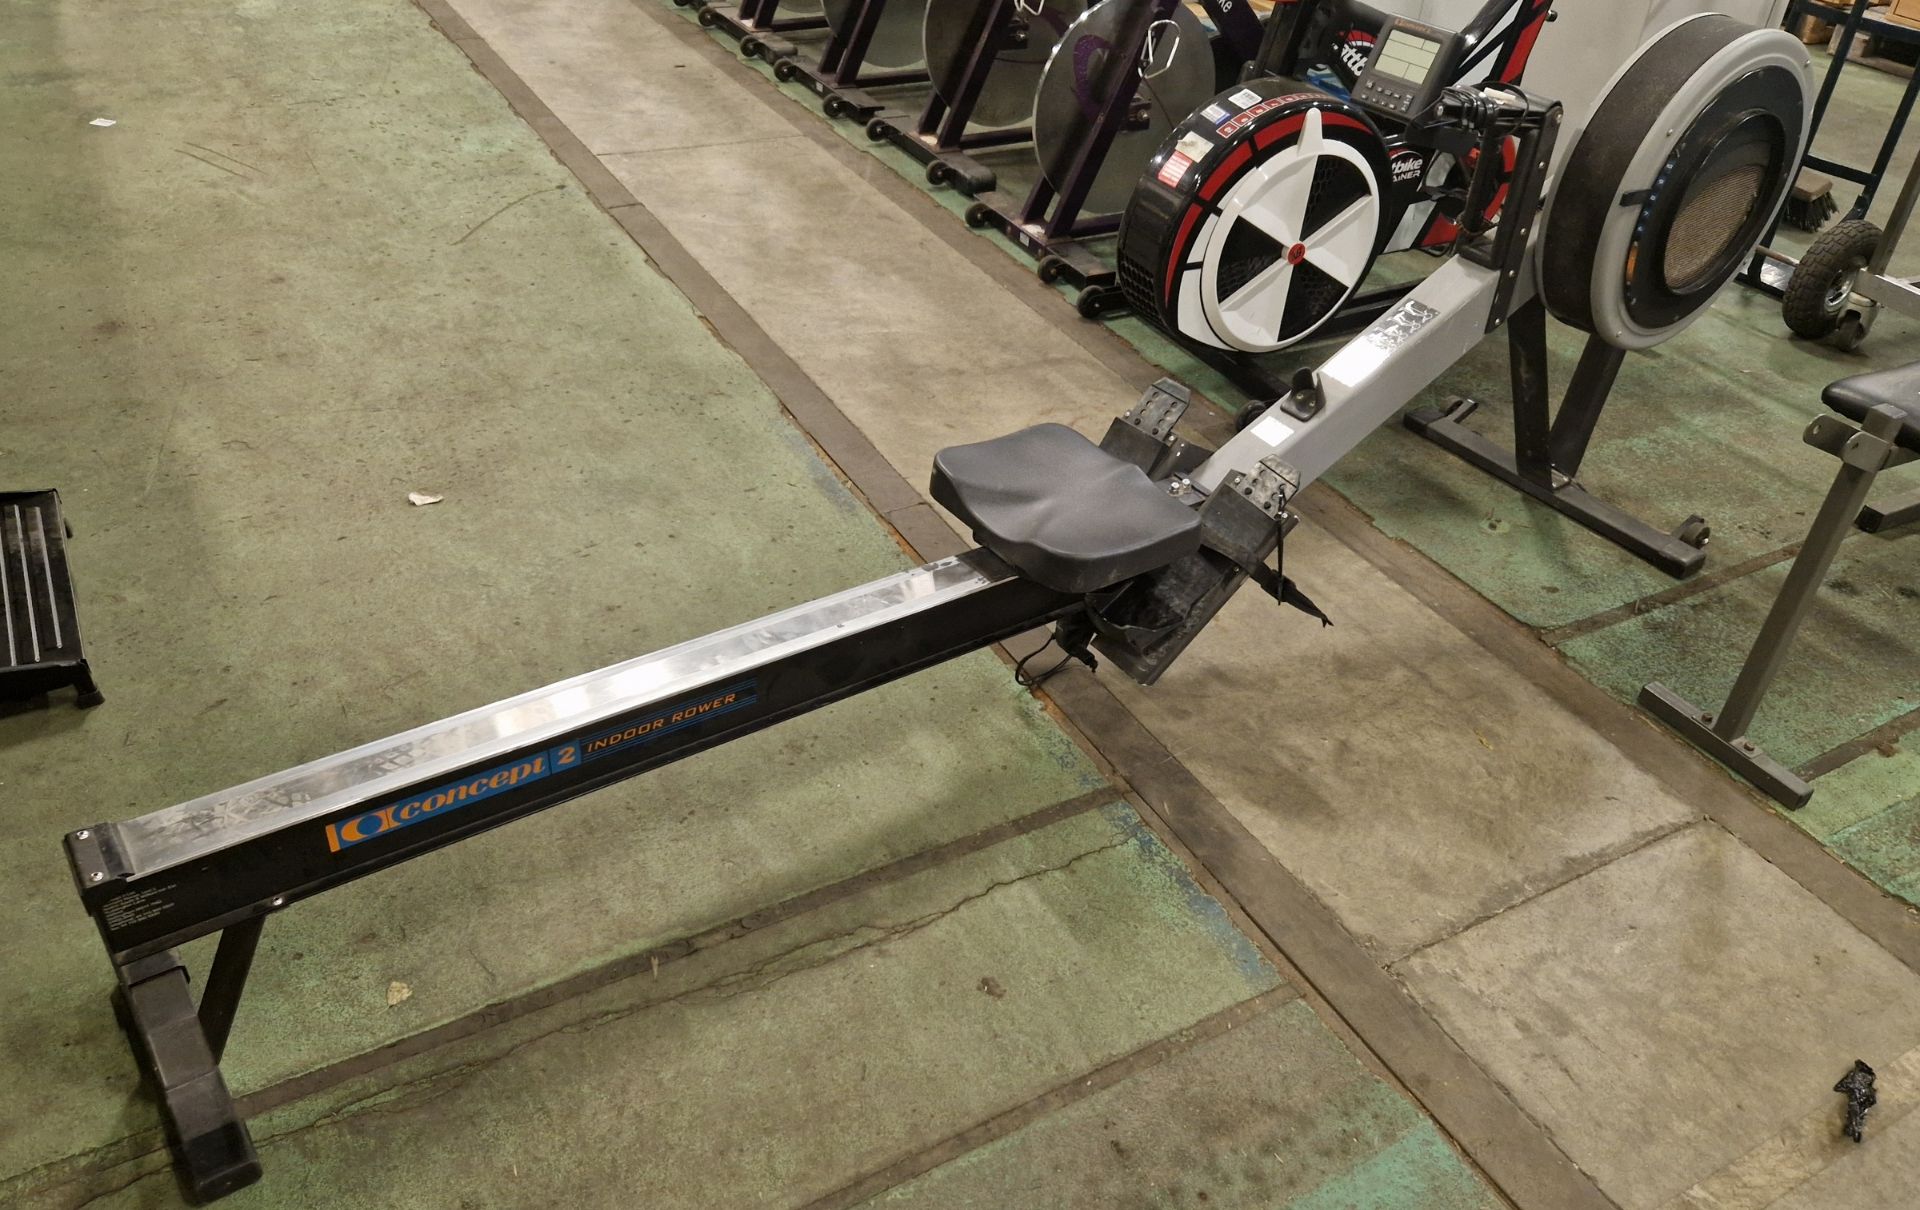 Concept 2 indoor rower with performance monitor 2 (PM2) - L 2400 x W 620 x H 870mm